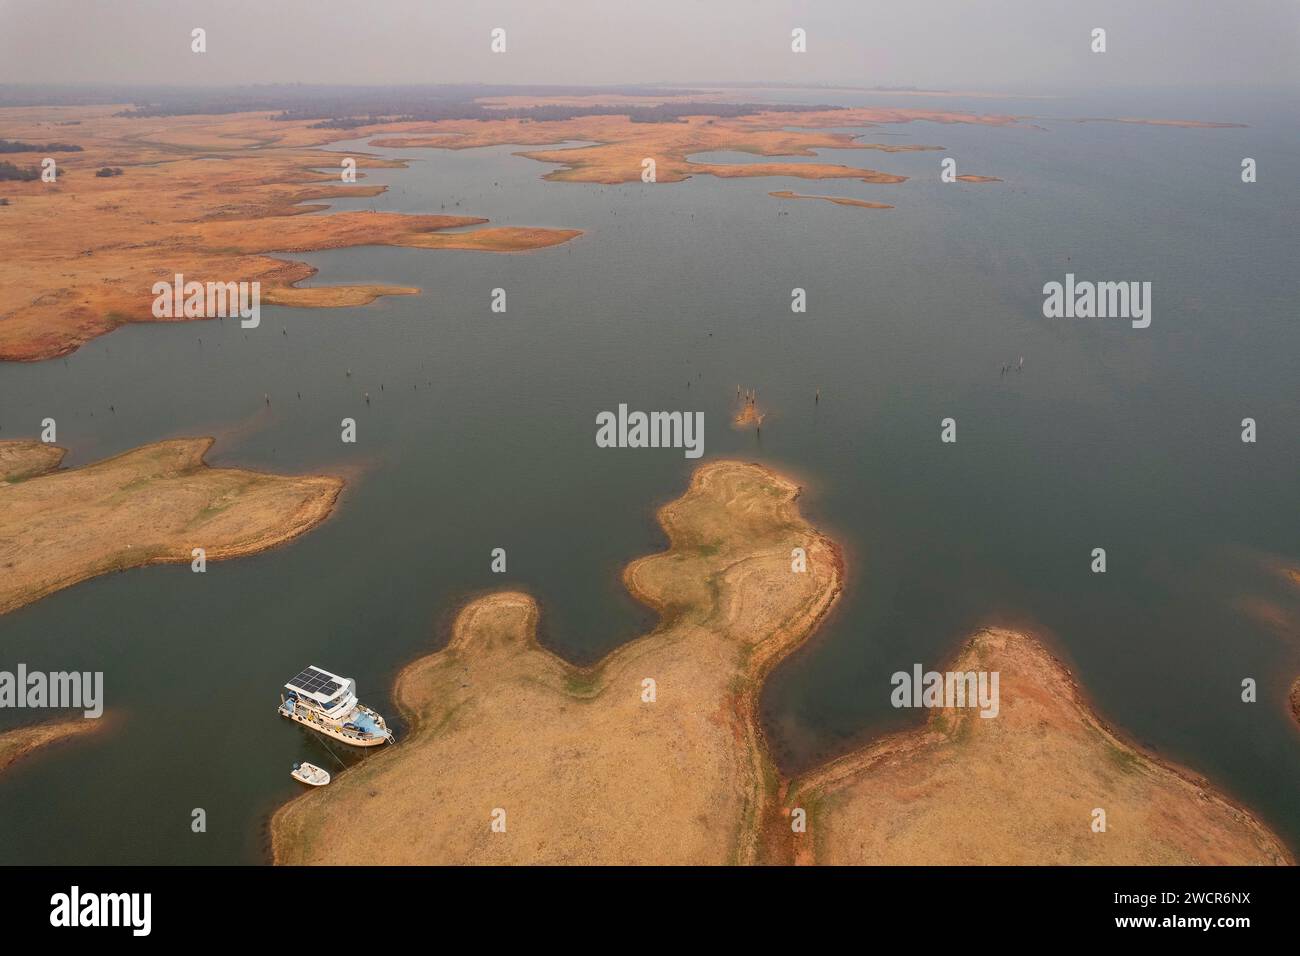 A houseboat can be seen in this aerial image of Lake Kariba, Zimbabwe. Stock Photo